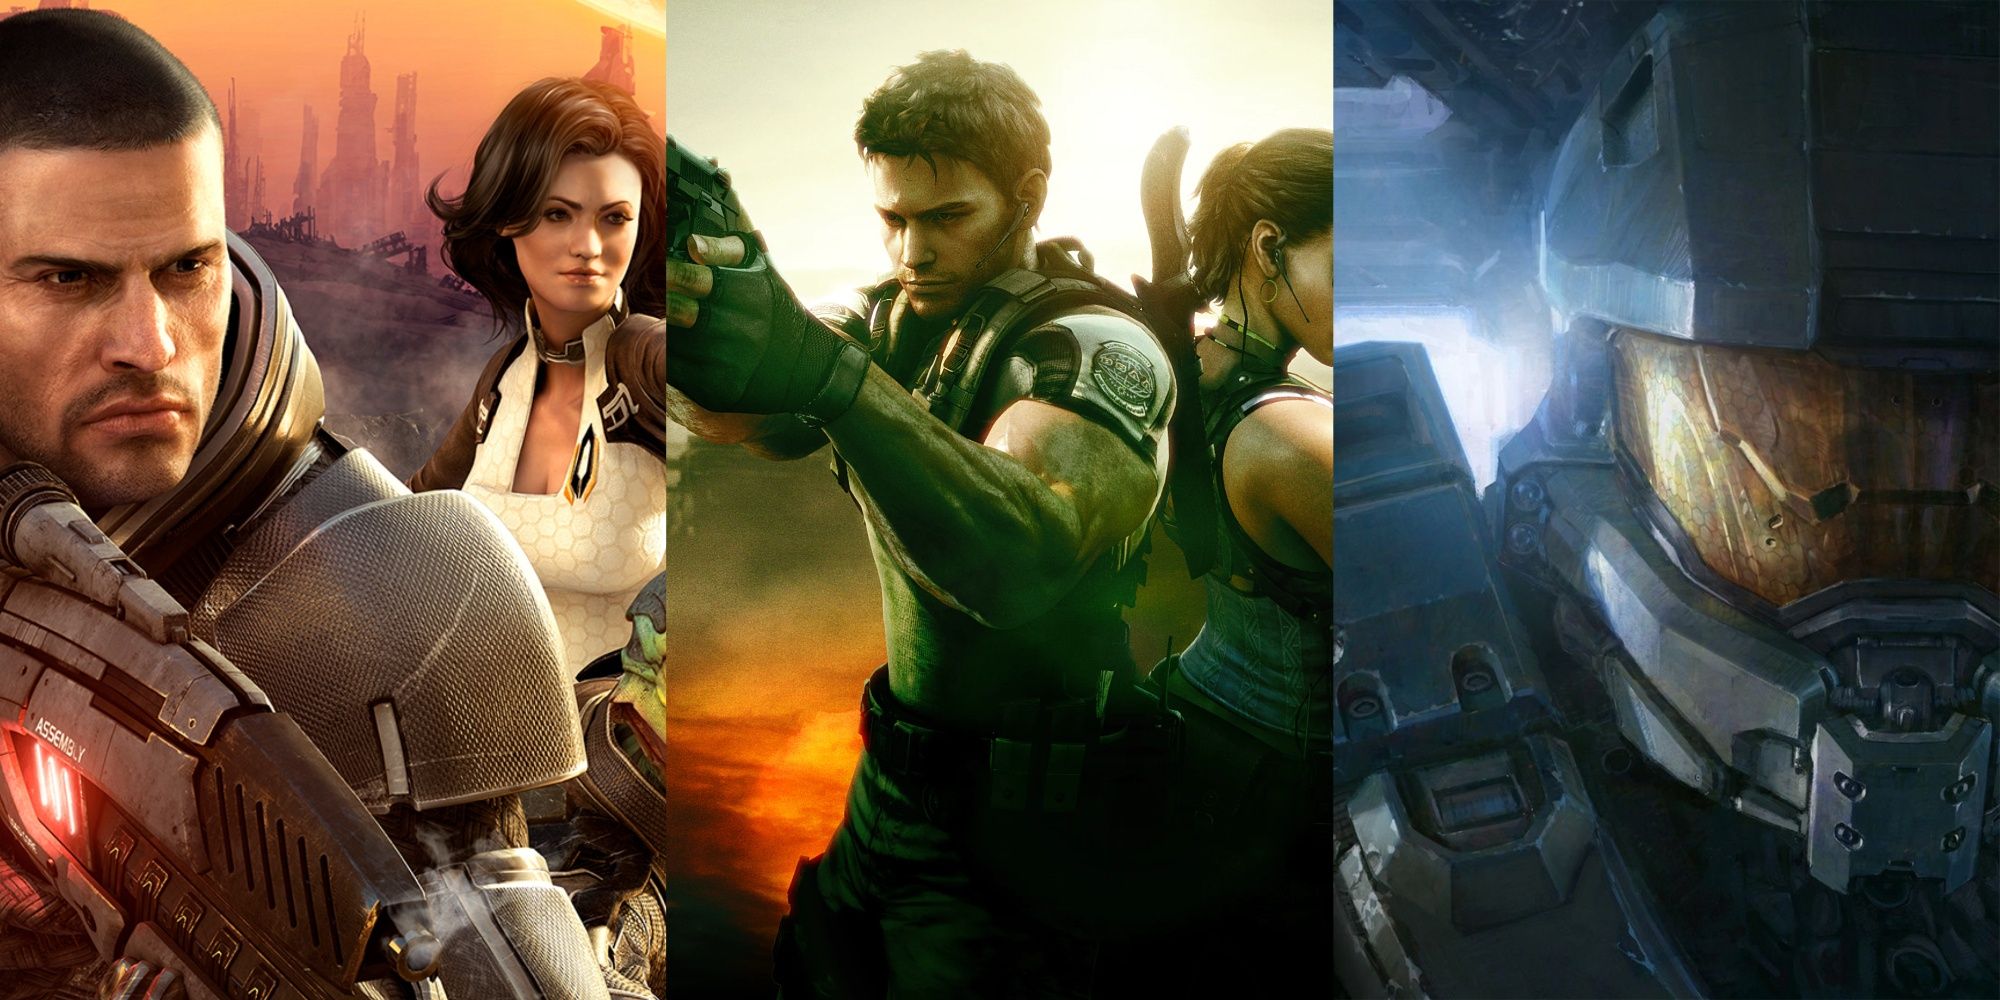 Cover art for Mass Effect 2 and Resident Evil 5, plus official artwork from Halo 4.